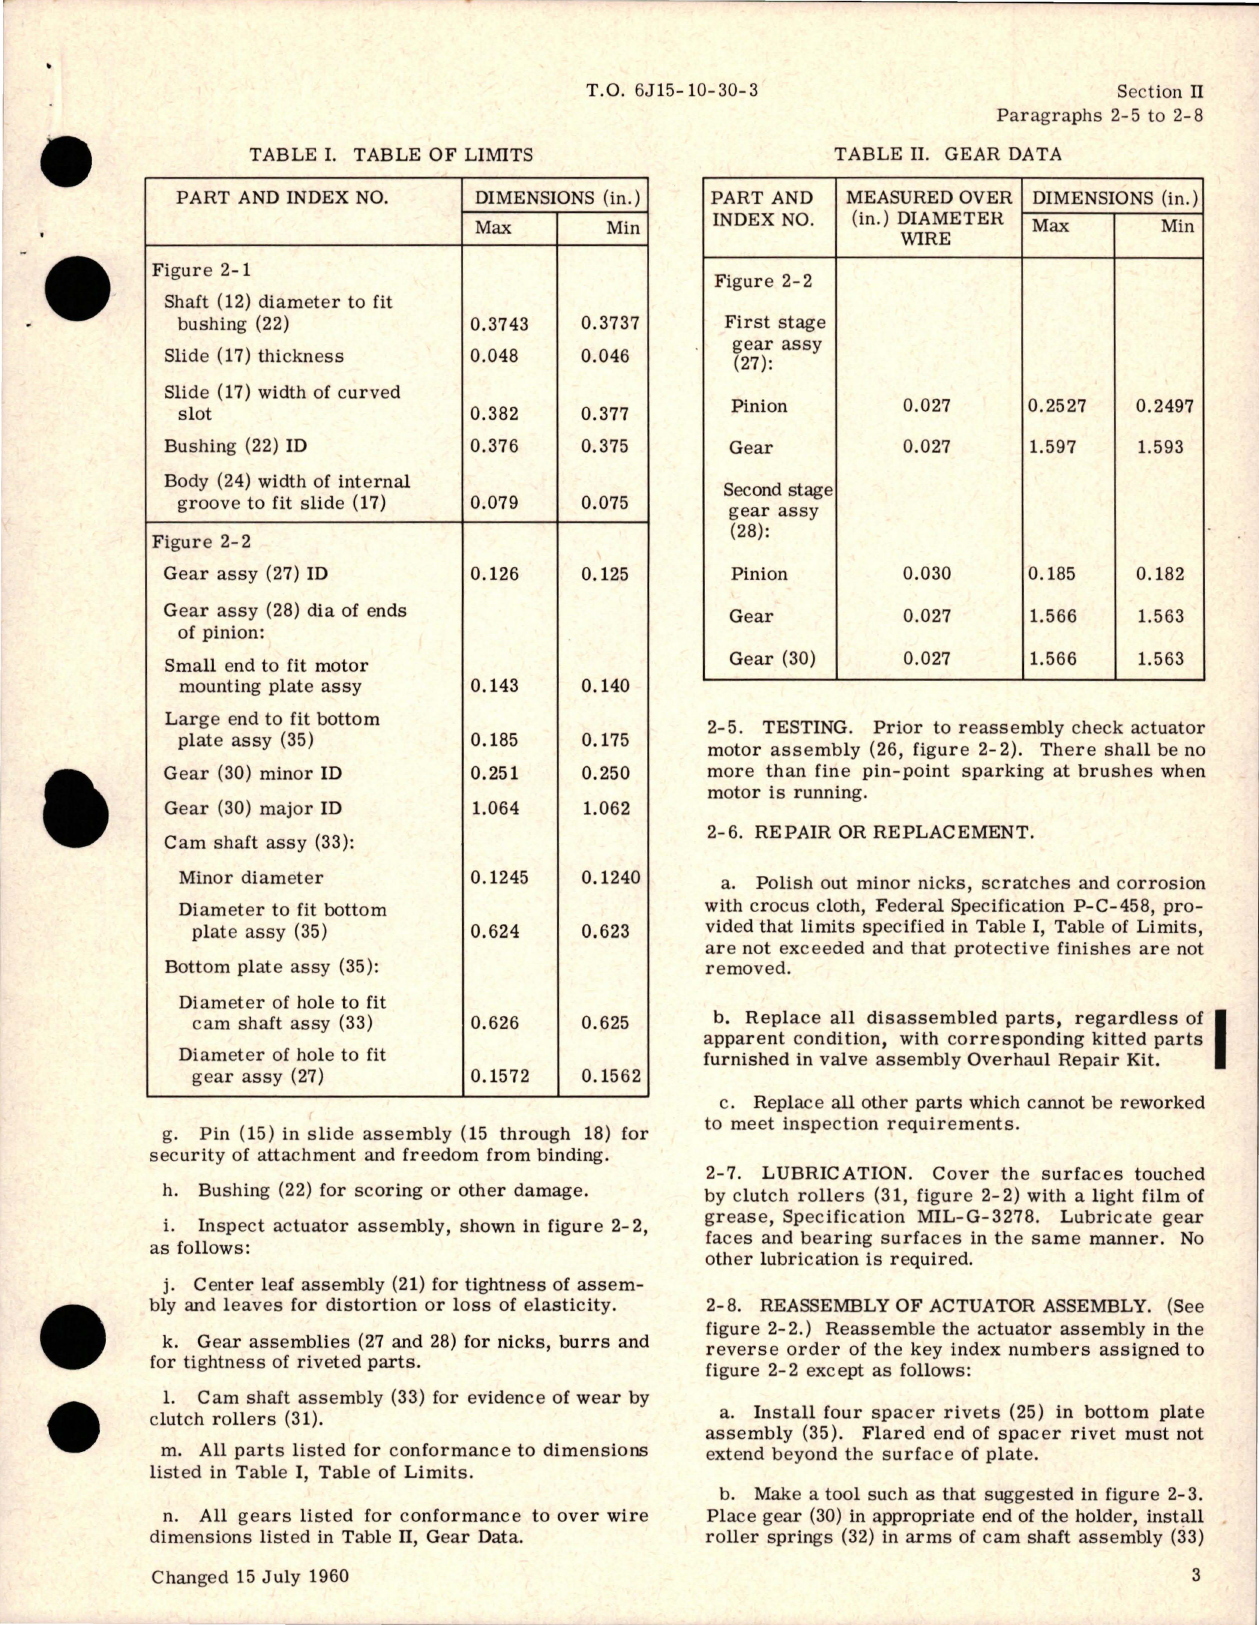 Sample page 7 from AirCorps Library document: Overhaul for Motor Operated Shutoff Valves